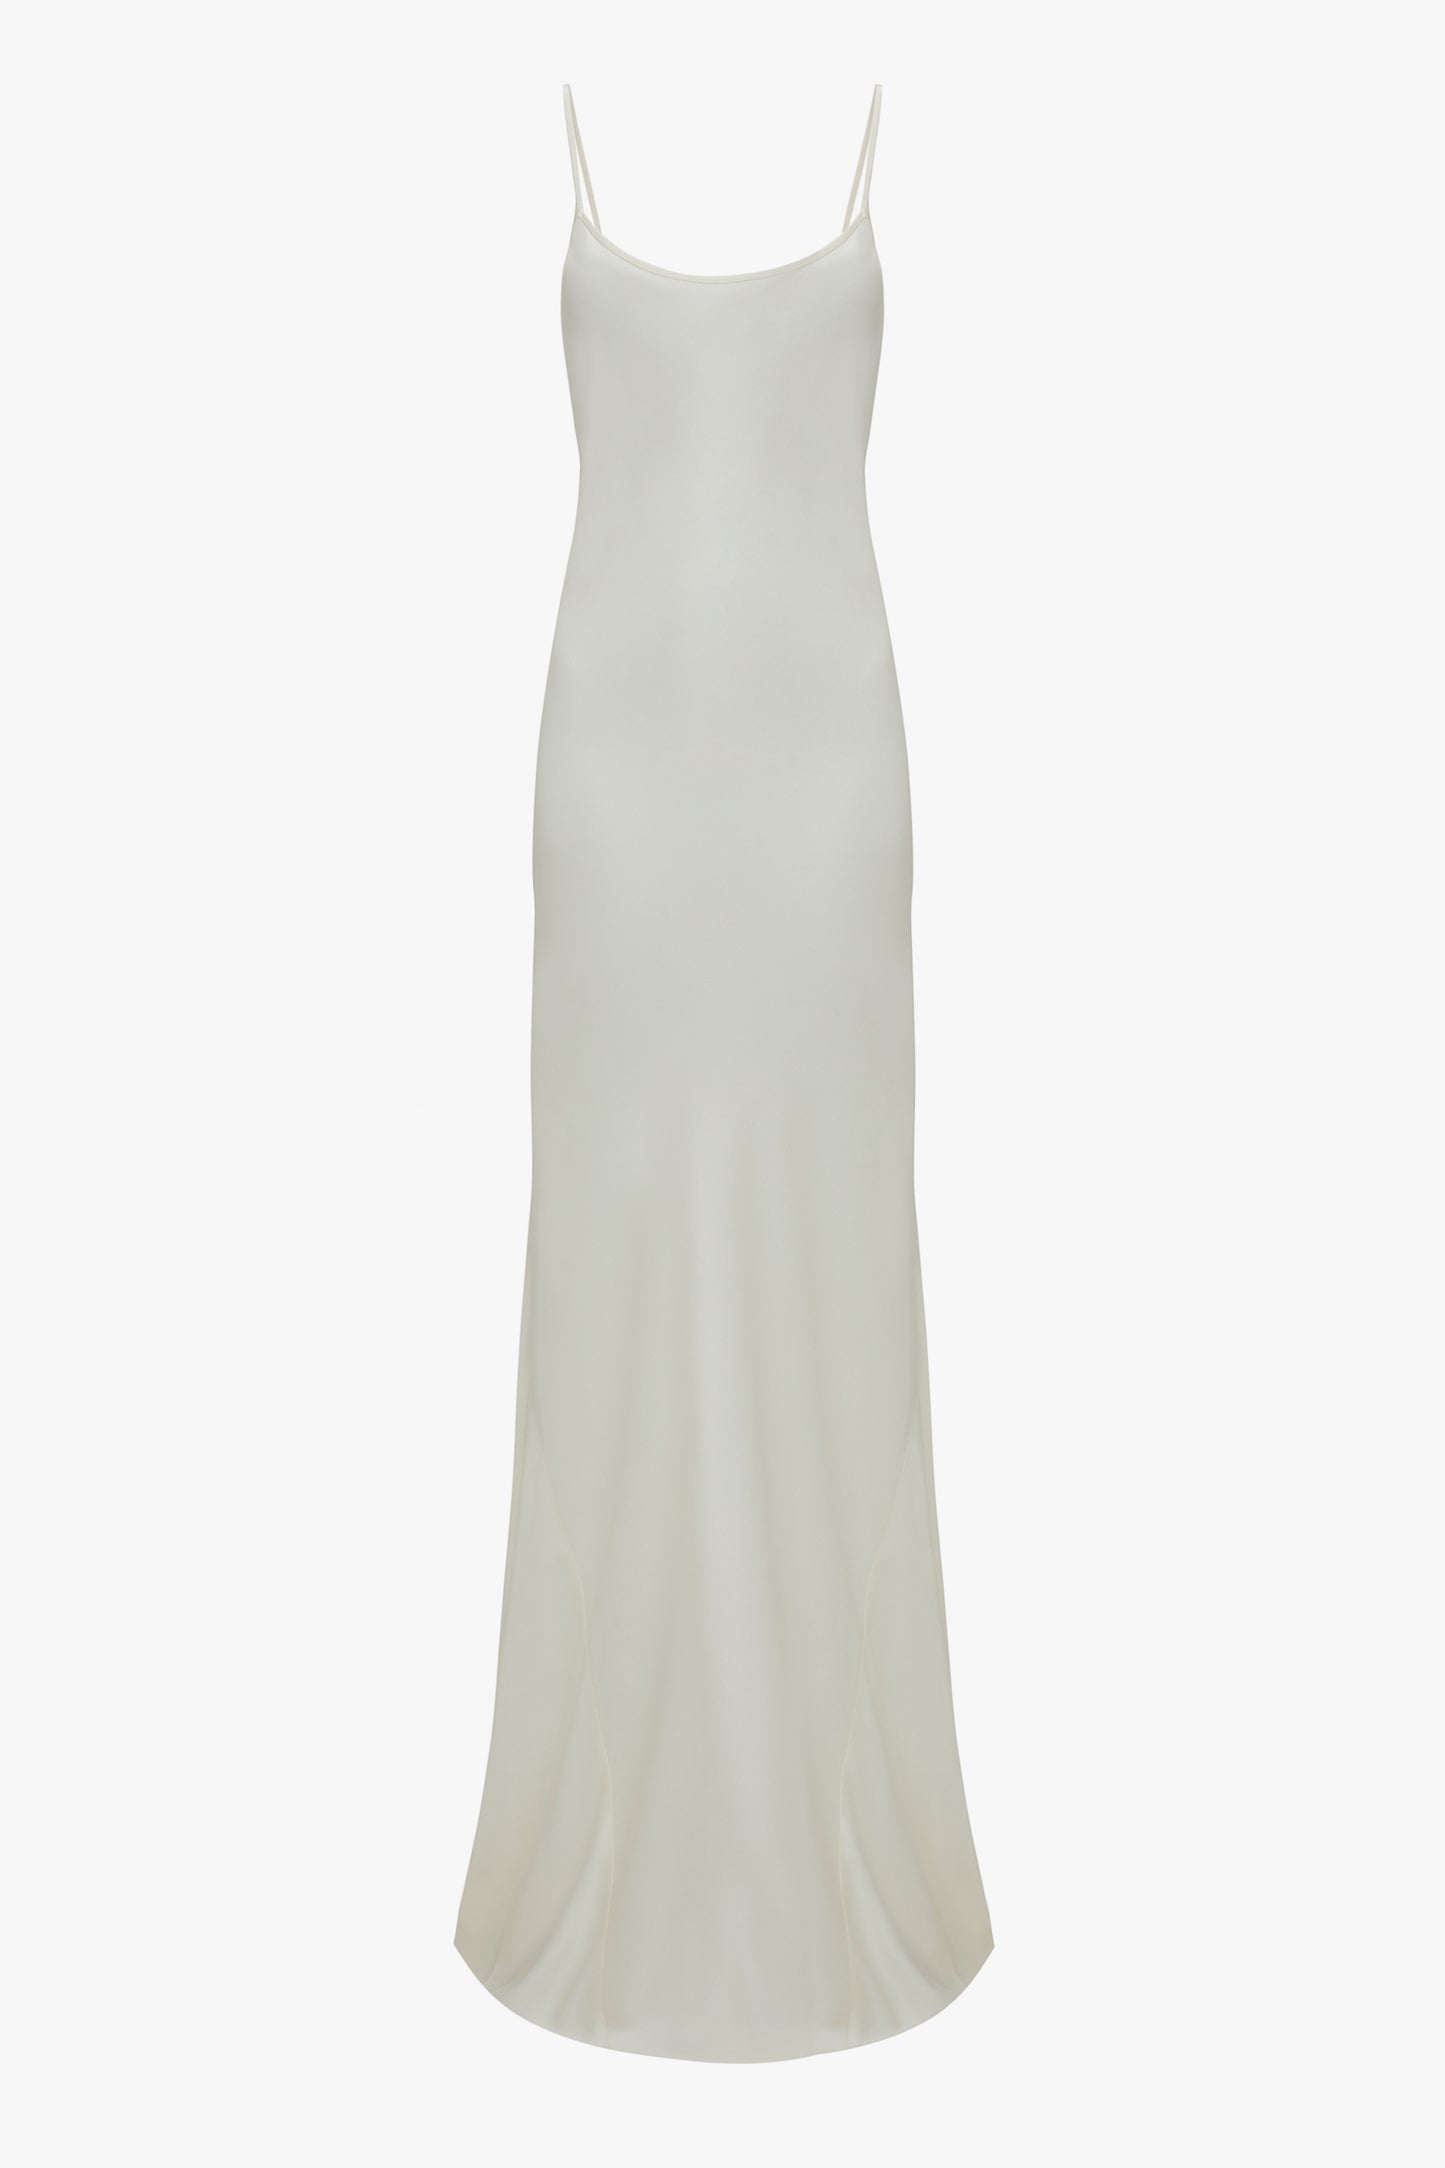 Floor-Length Cami Dress In Ivory by Victoria Beckham displayed against a plain background.